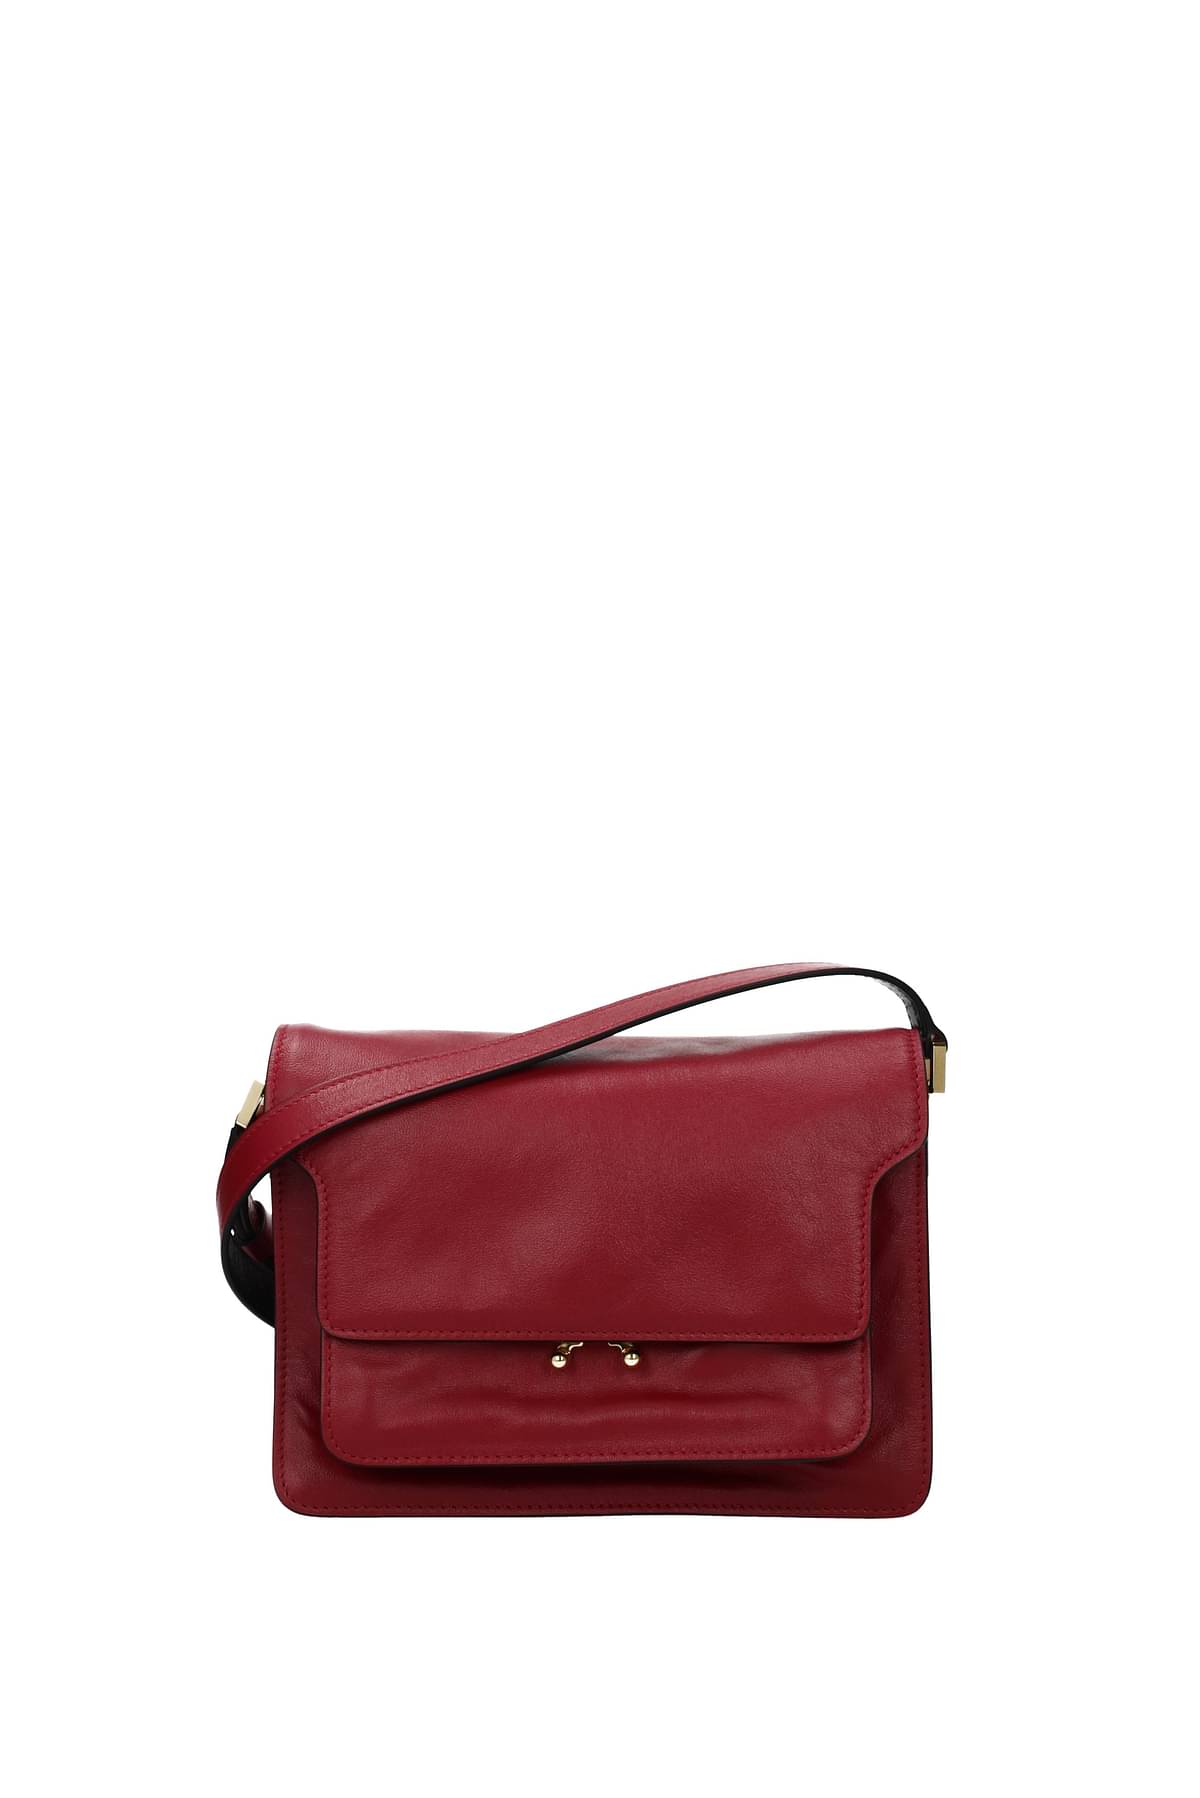 Red leather Trunk Soft bag